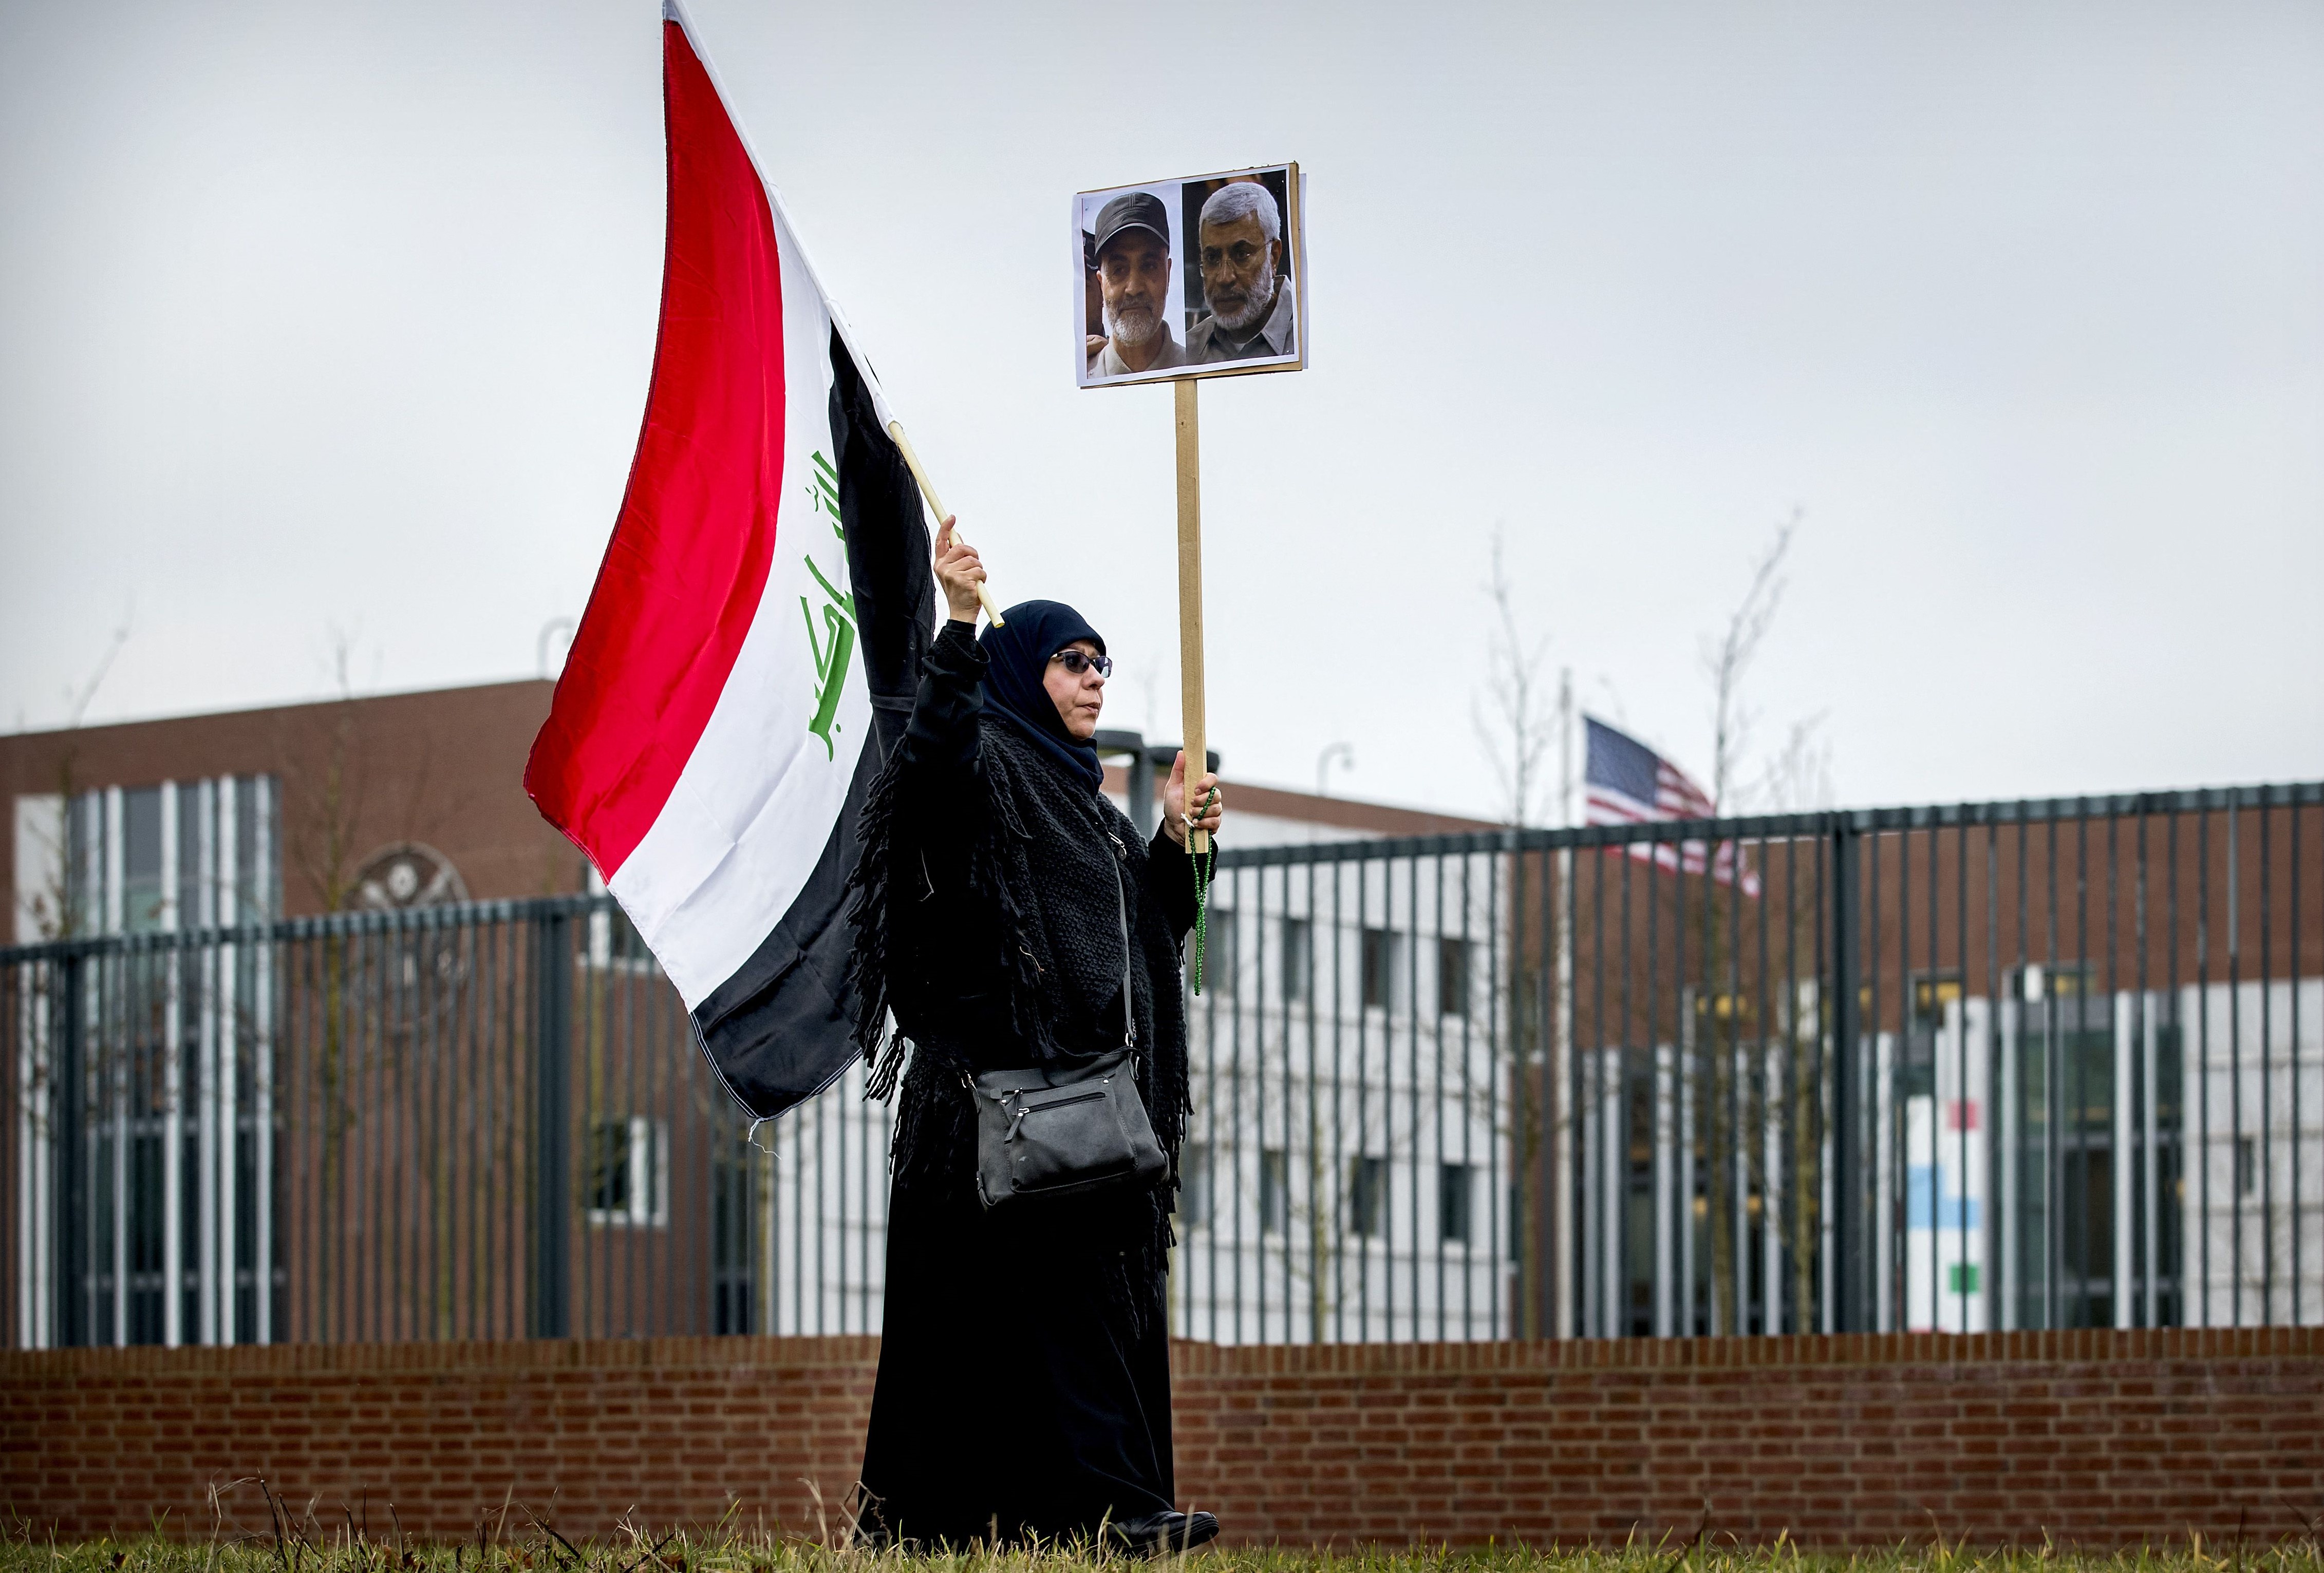 A protester holds an Iraqi flag and portraits of Iranian commander Qasem Soleimani (L) and Iraq's Hashed al-Shaabi military network deputy chief Abu Mahdi al-Muhandis, both killed in Baghdad early on January 3, 2020, by a US airstrike, as she protests outside the US Embassy in The Hague on January 7, 2020